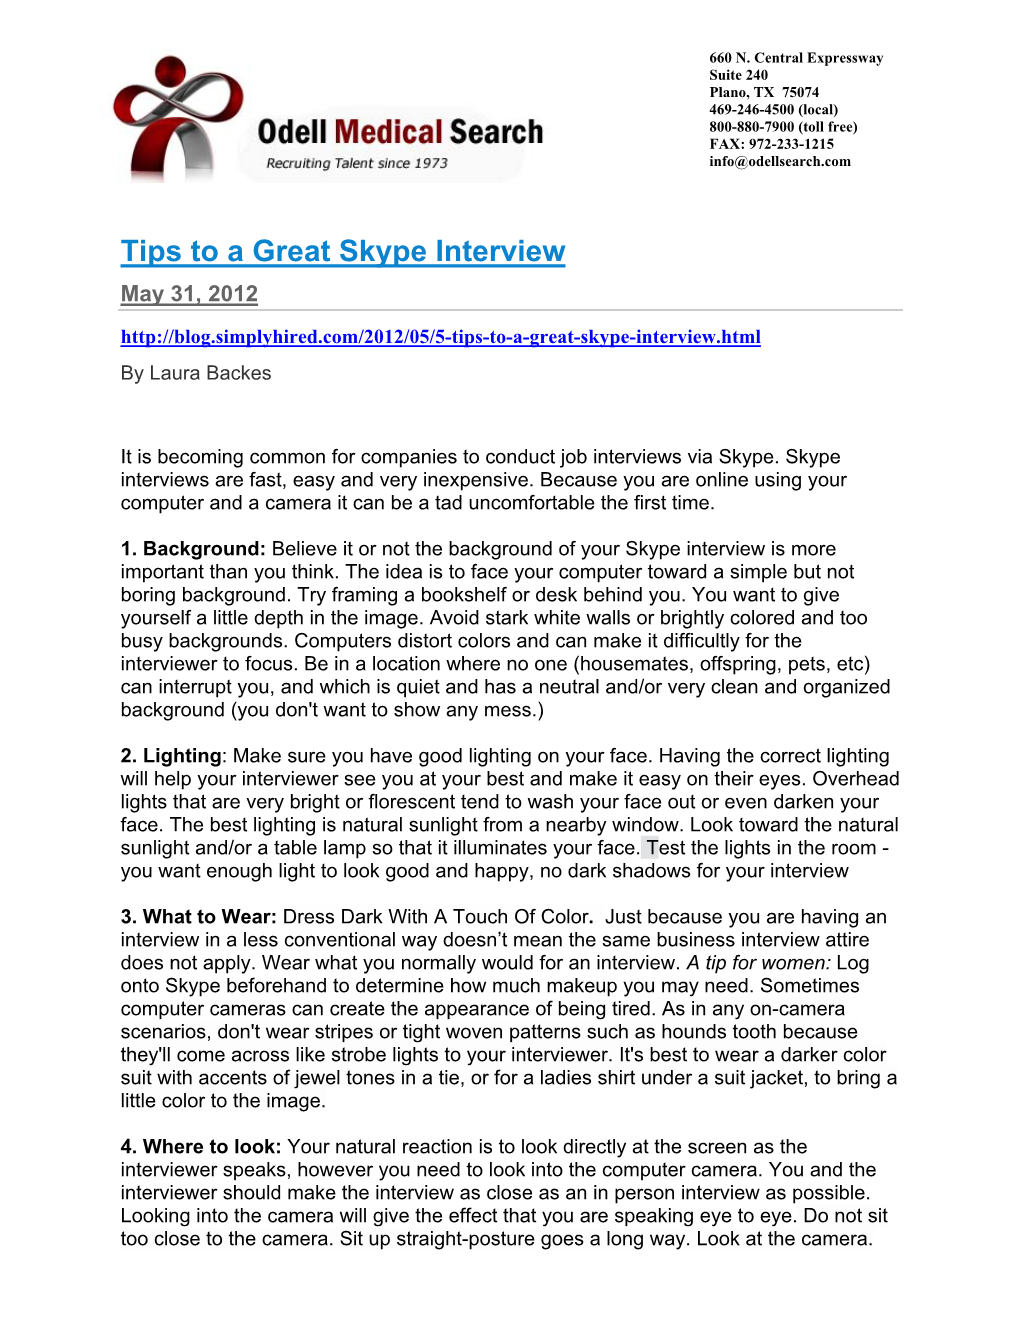 5 Tips to a Great Skype Interview